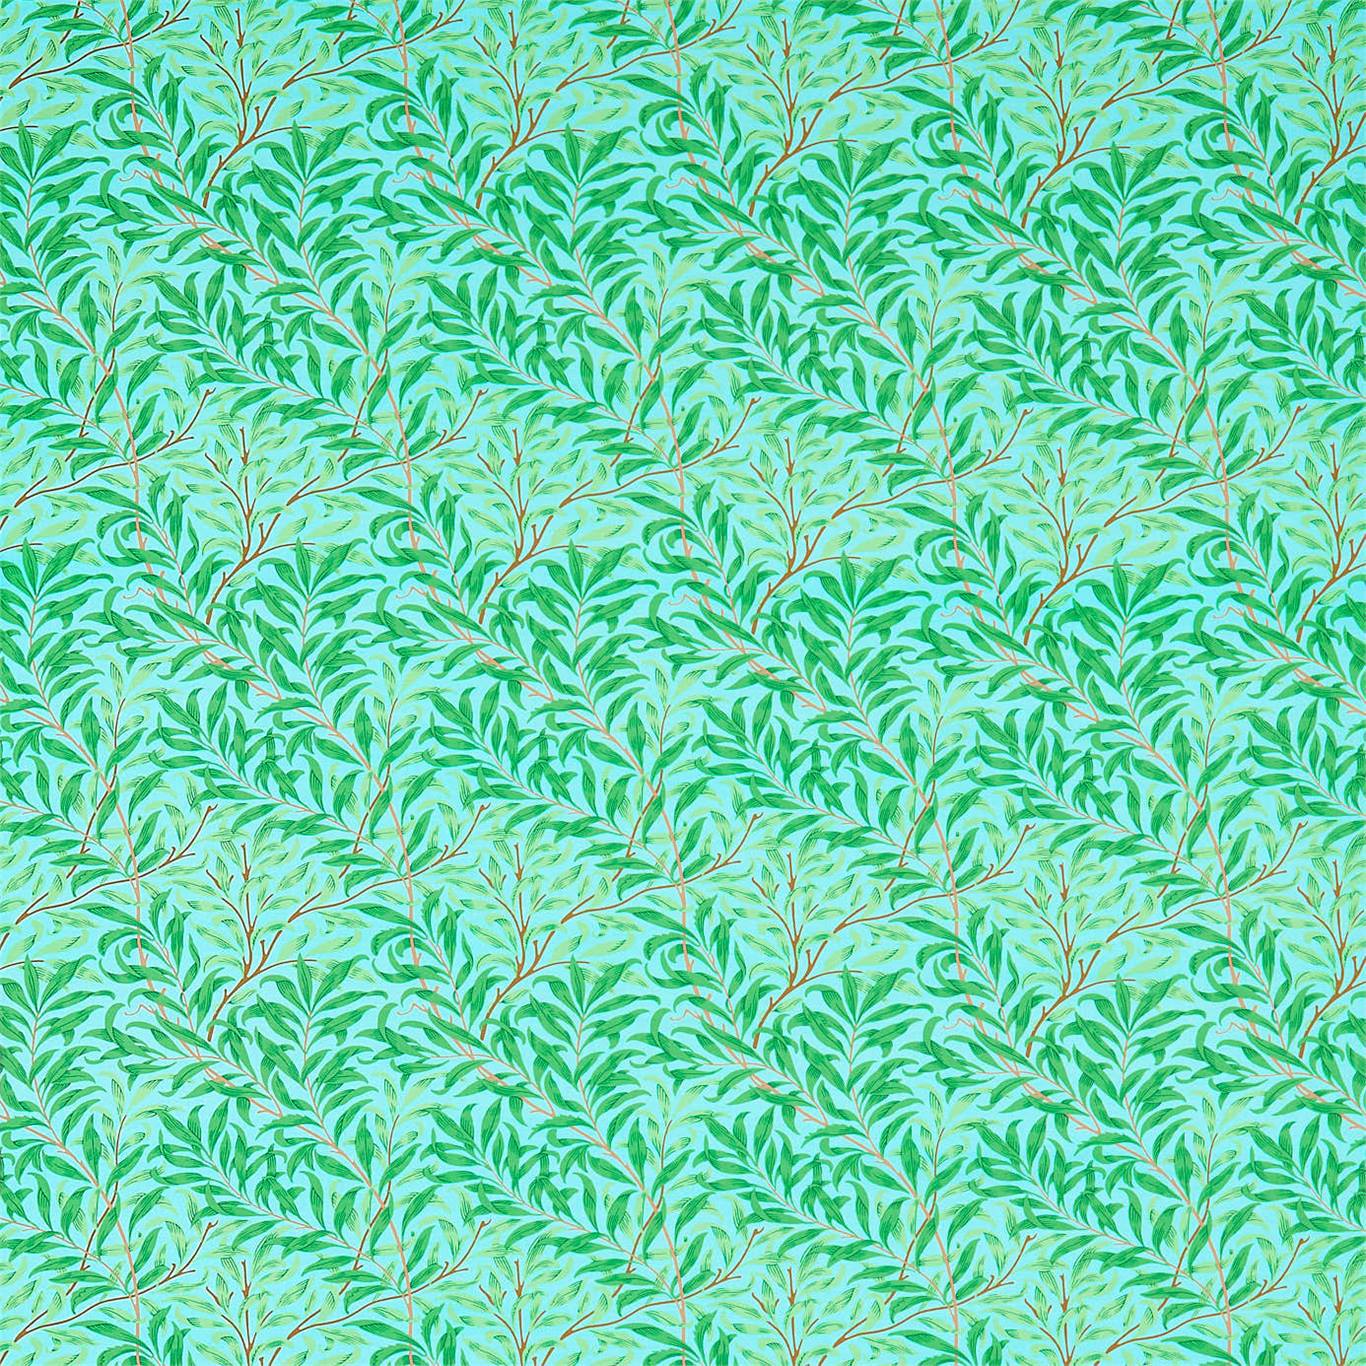 Willow Boughs Sky/Leaf Green Fabric by MOR